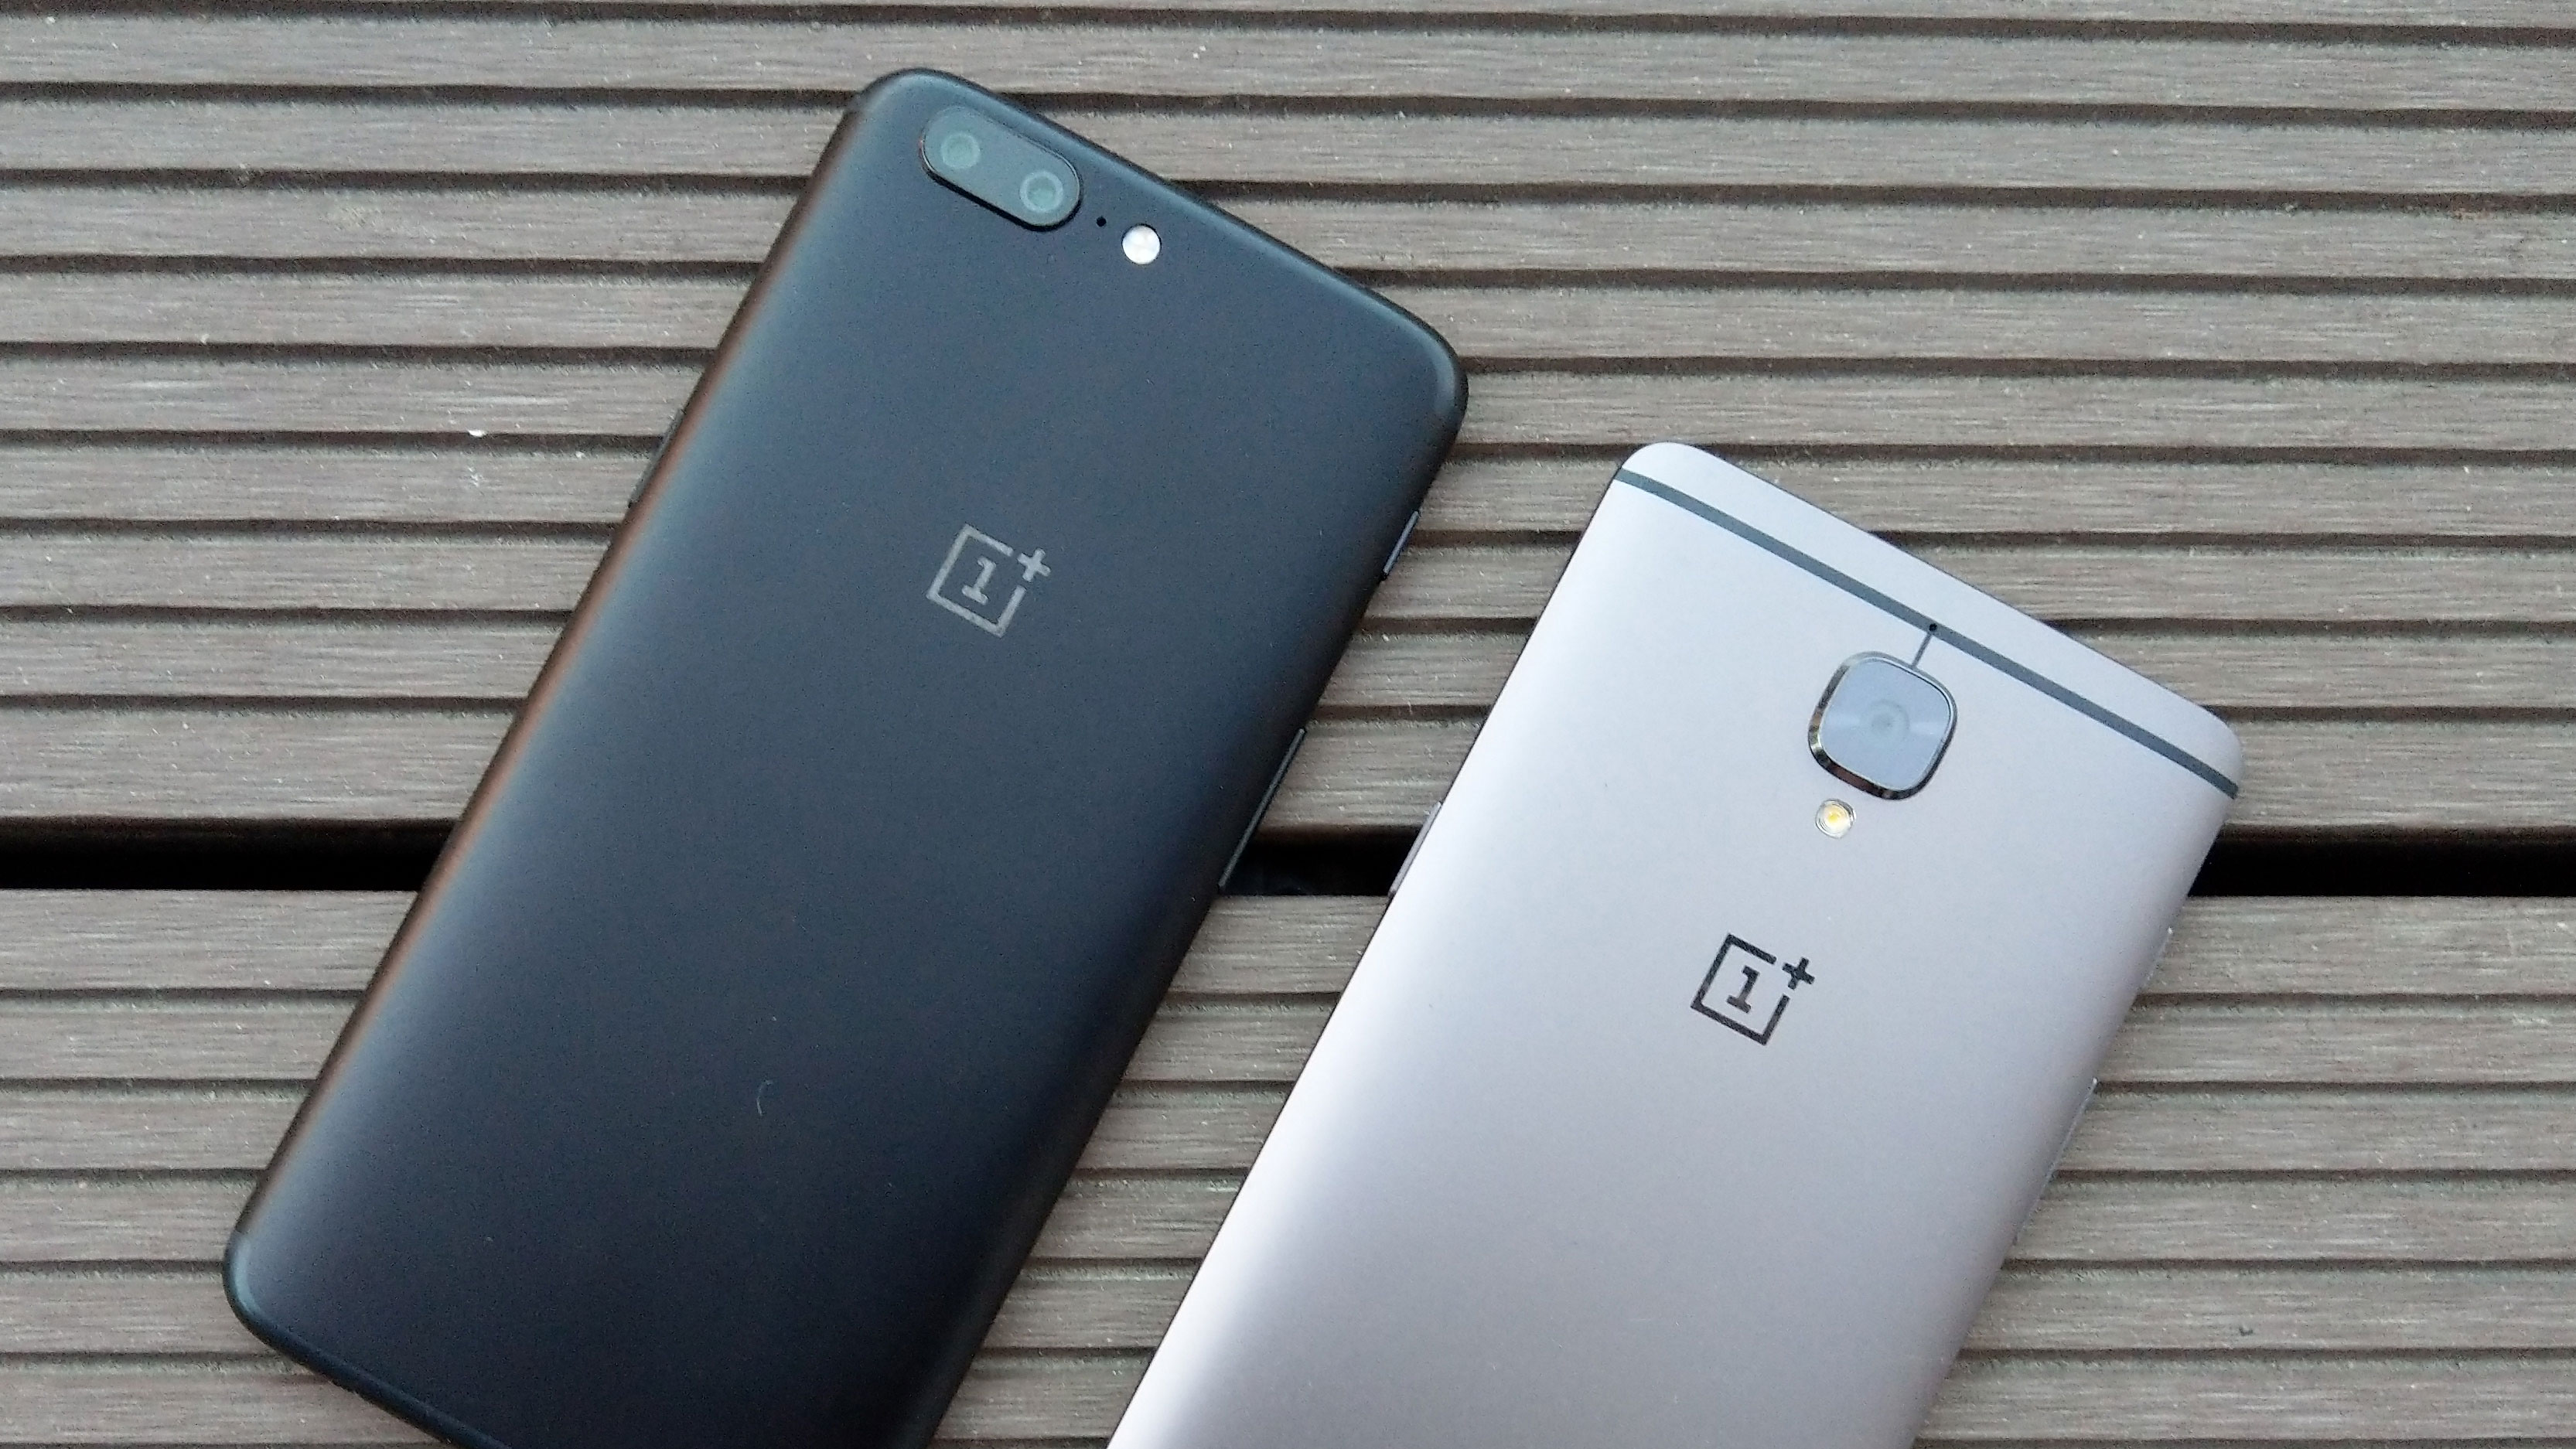 OnePlus 3 and 5